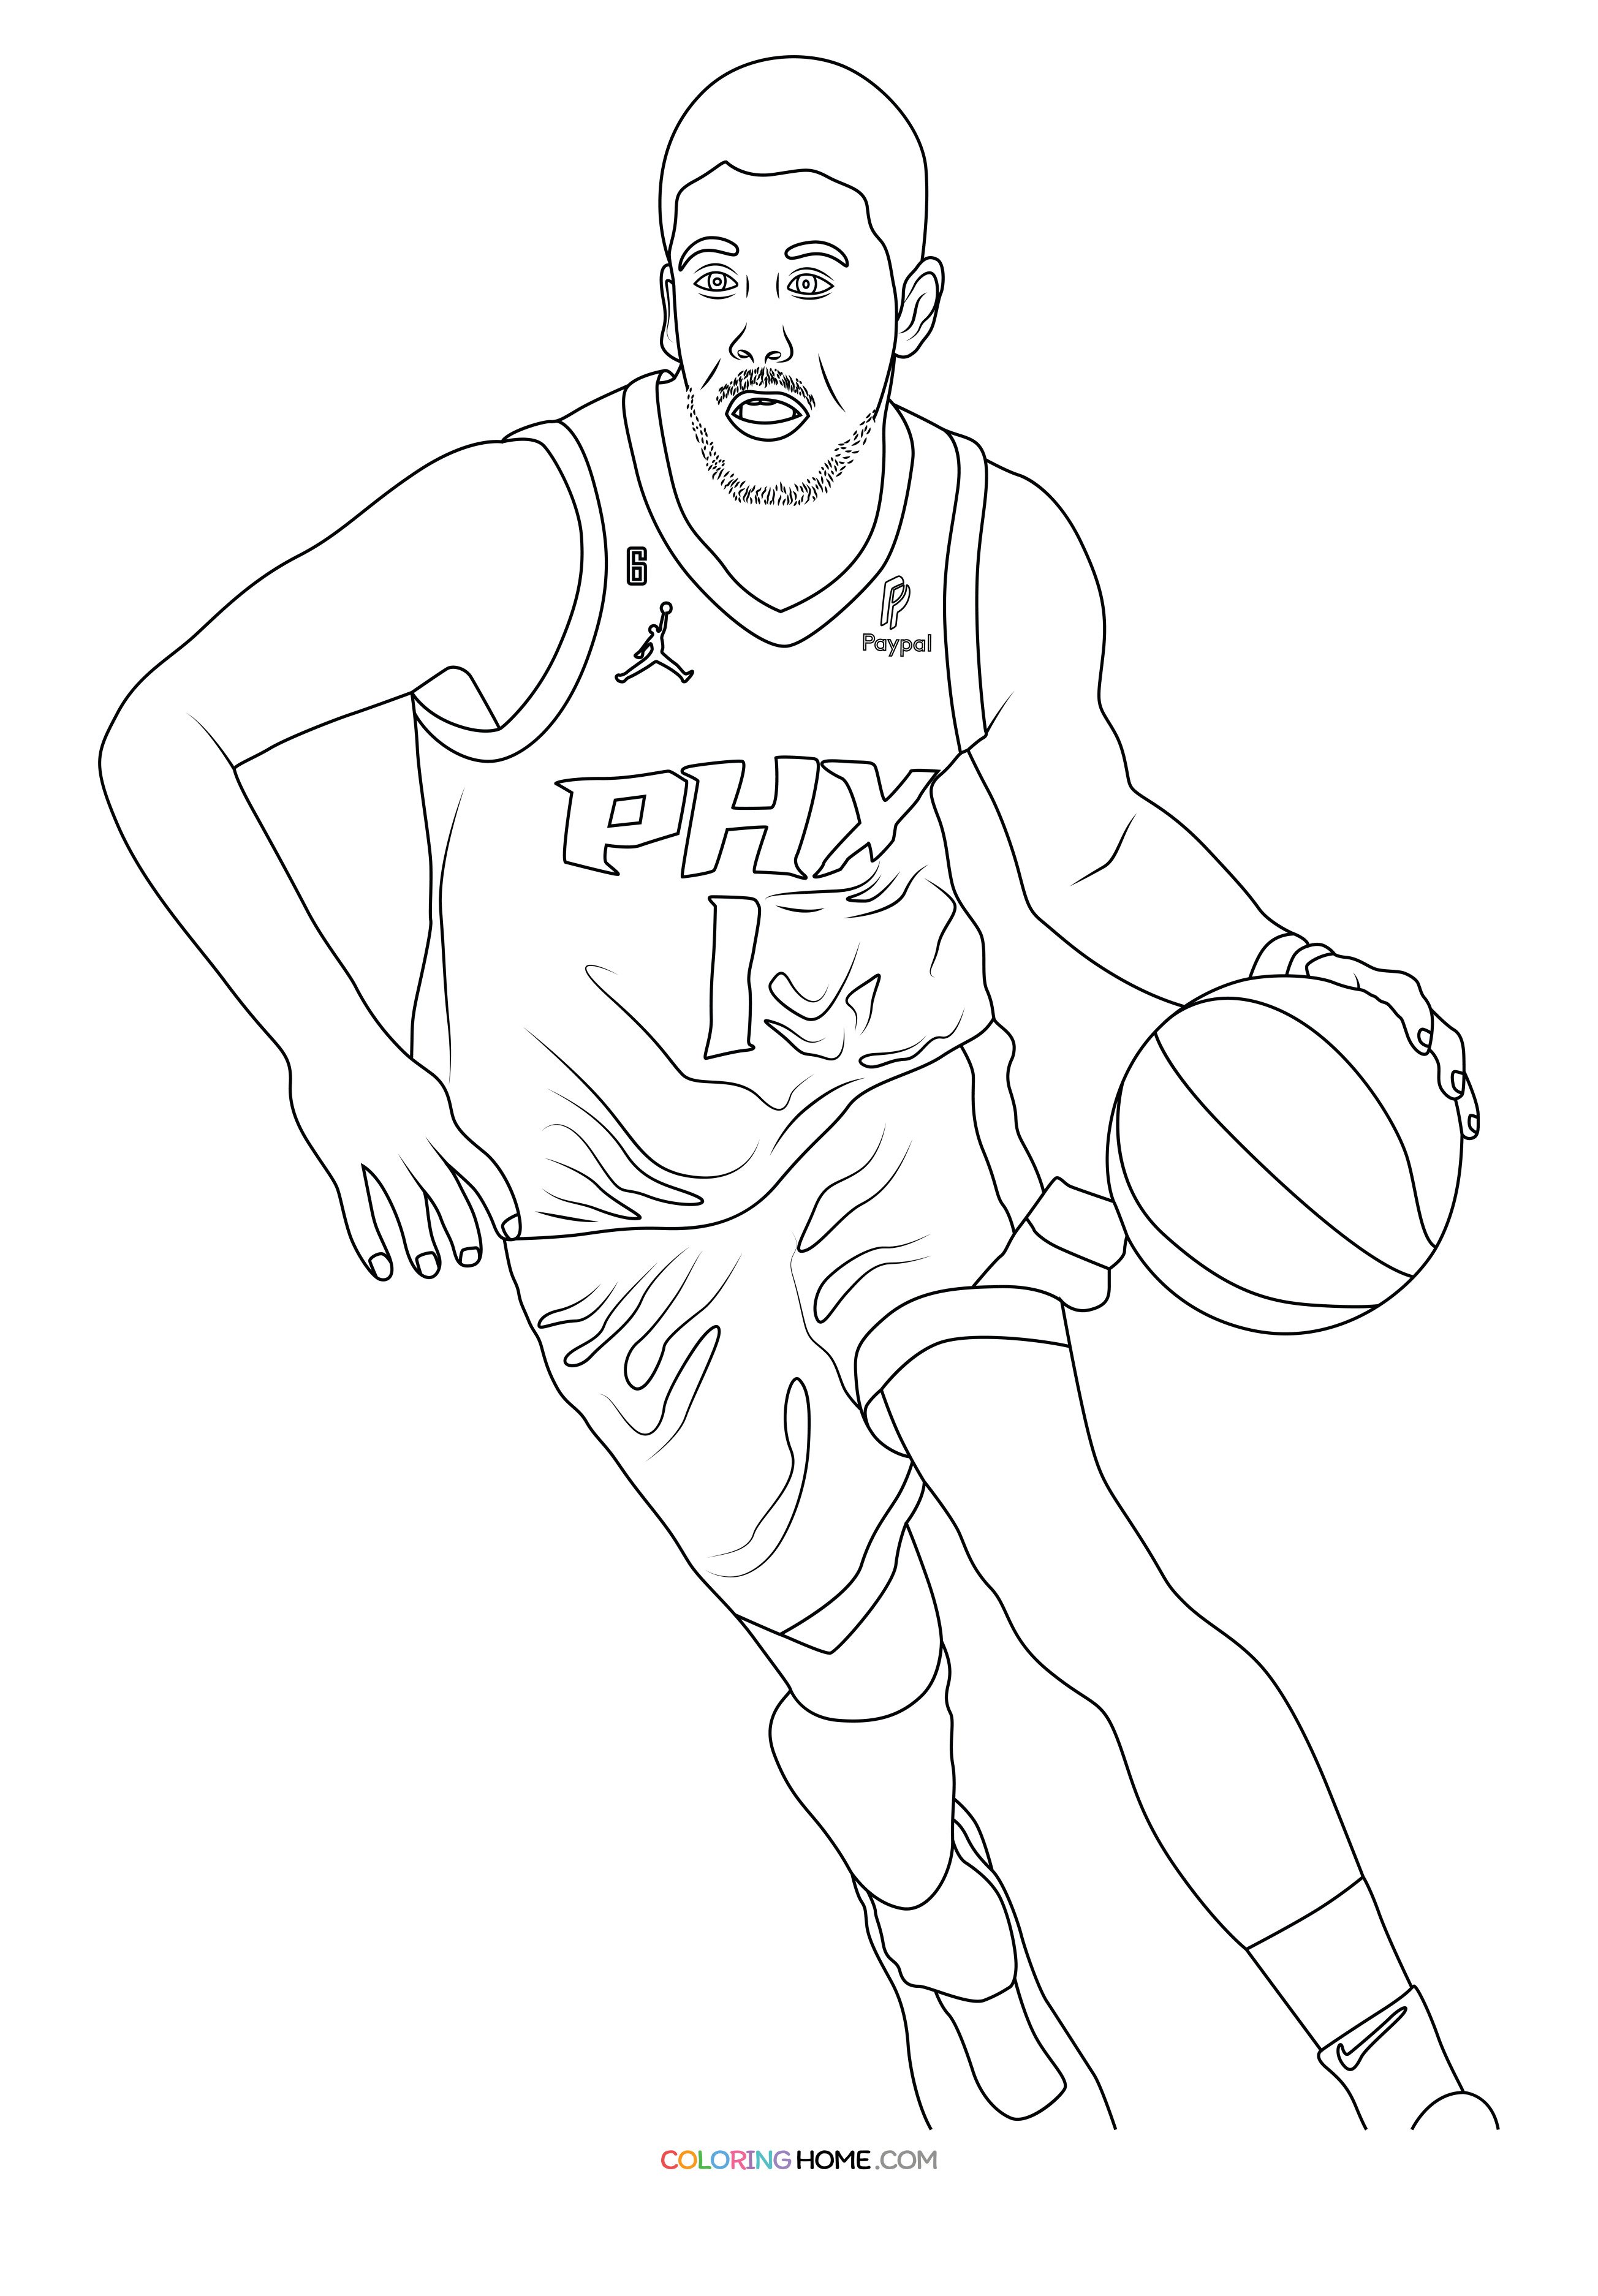 Devin Booker Coloring Page - Coloring Home